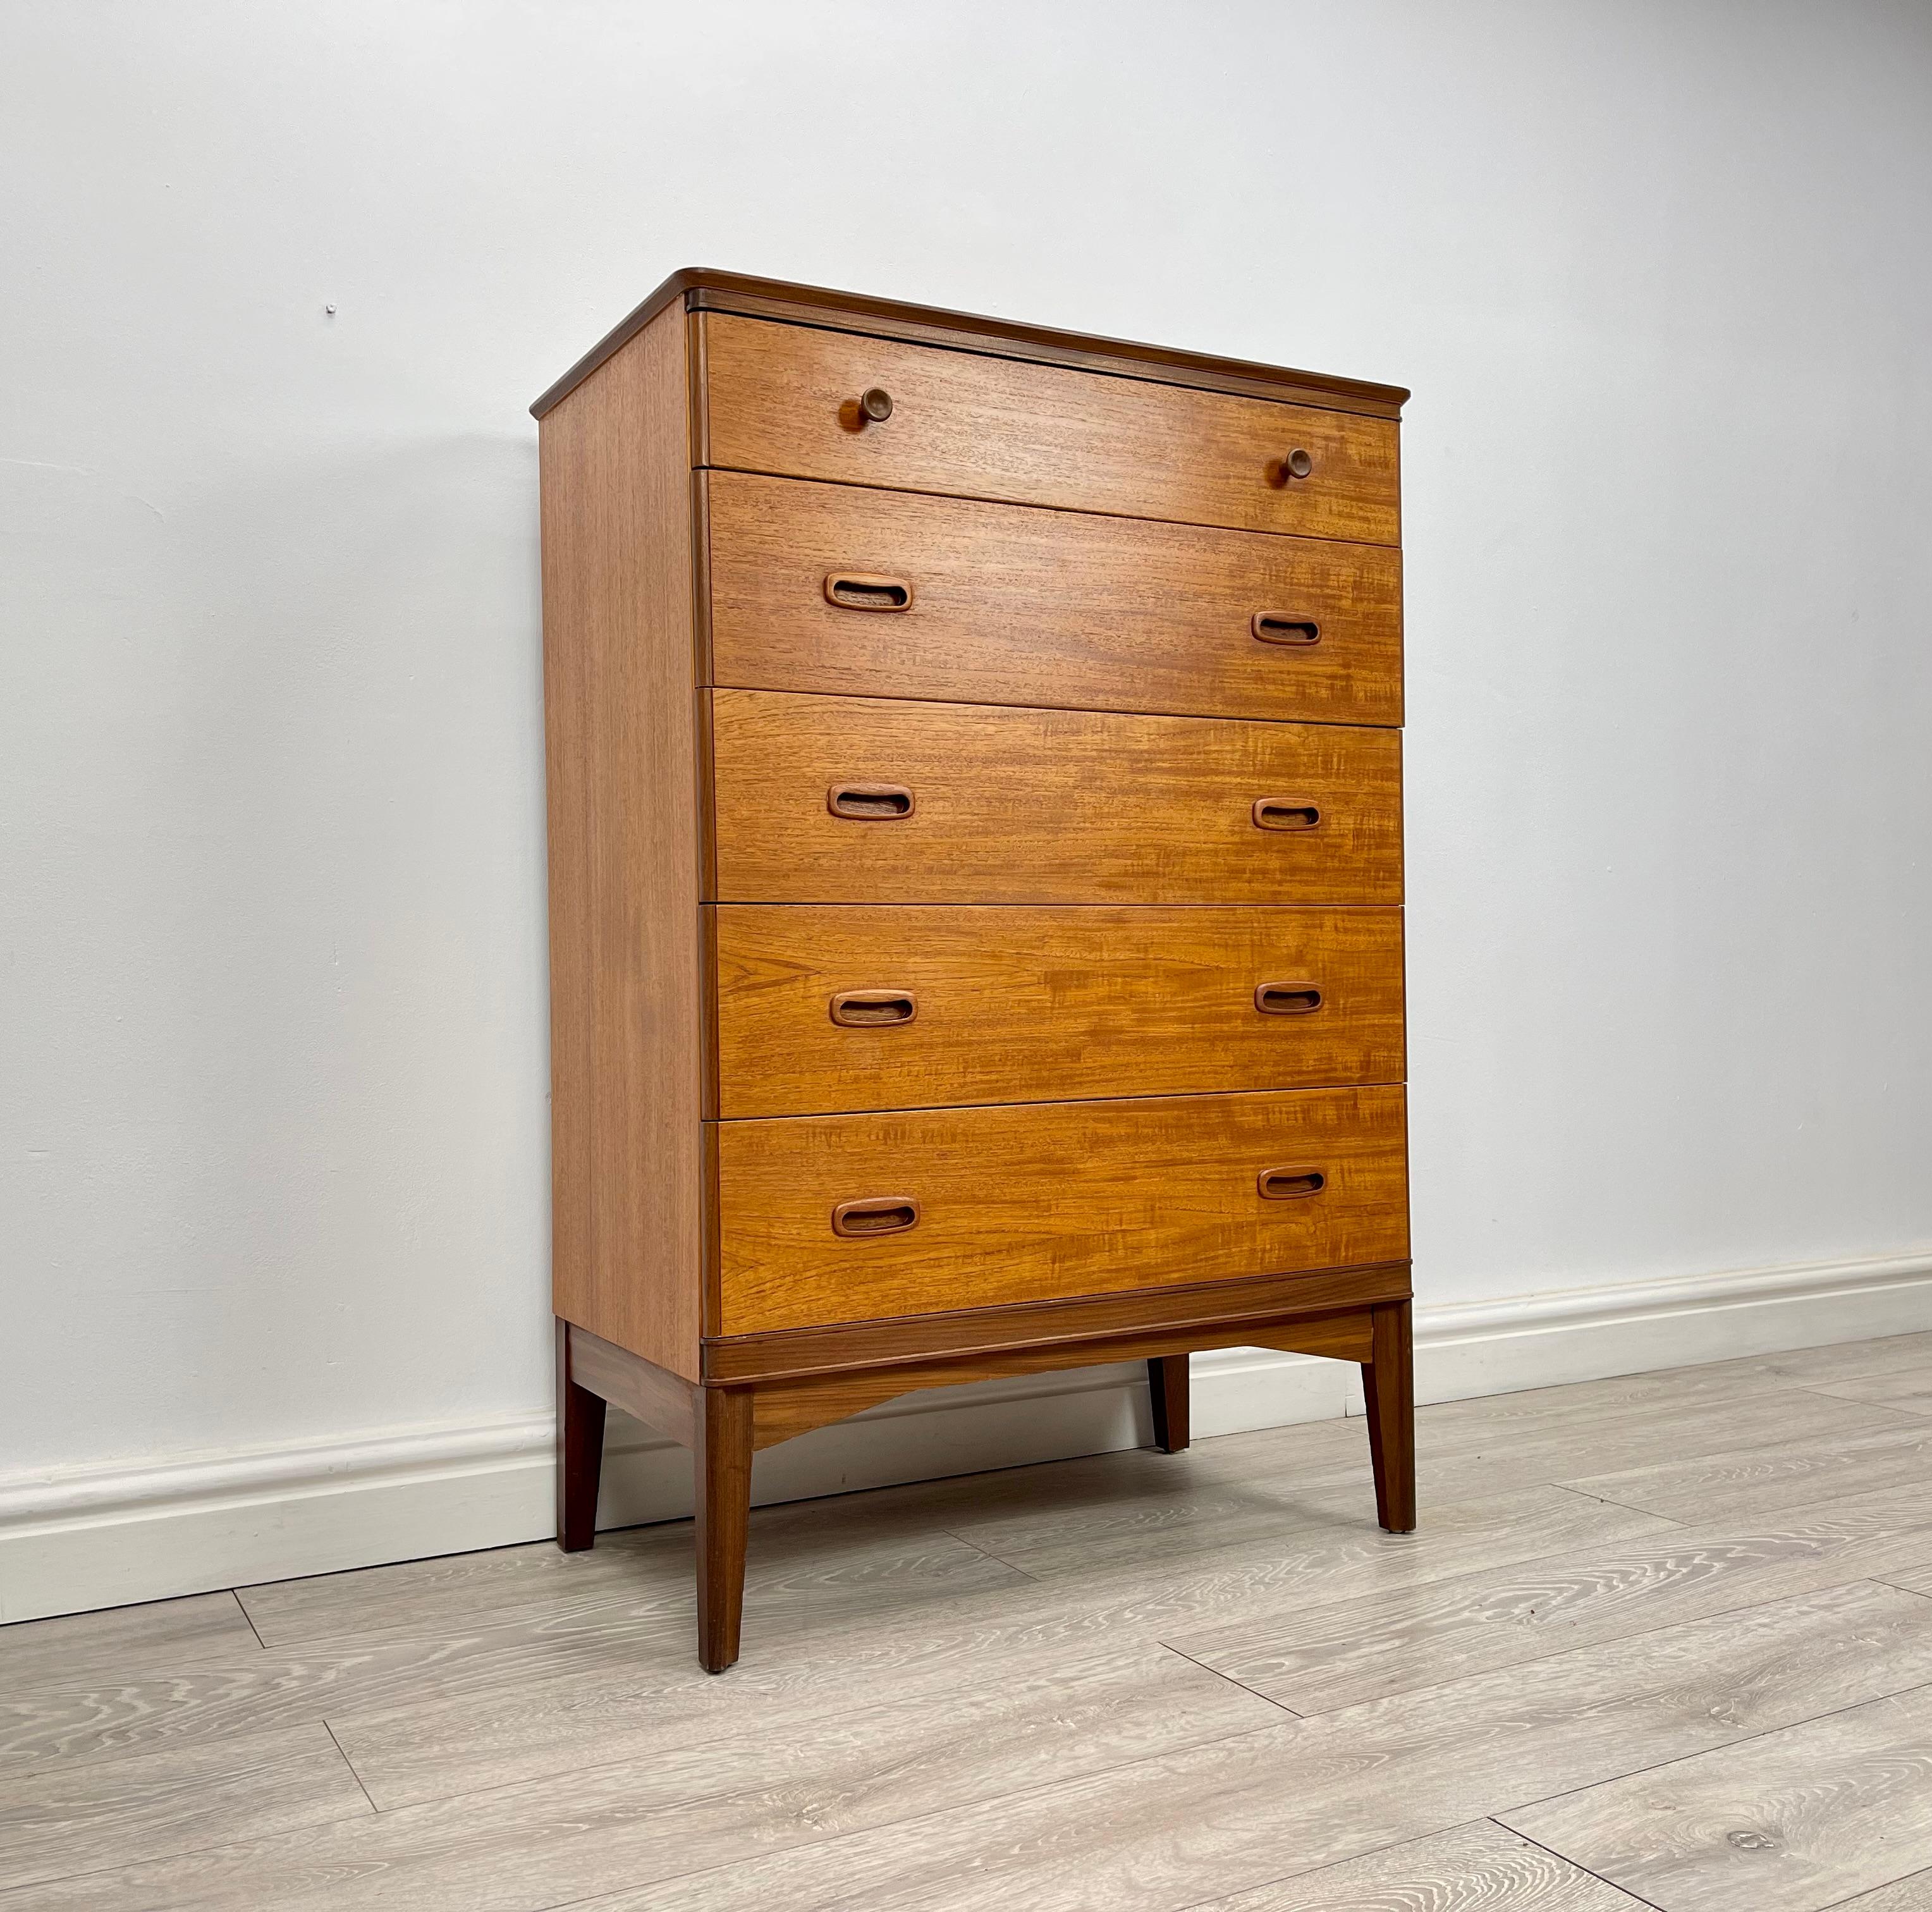 CHEST OF DRAWERS 
Midcentury teak tallboy chest of drawers made by Austinsuite circa 1960 .

The chest of drawers has stunning grain and golden patina throughout.

There’s five good size drawers fitted with solid teak inset handles , all drawers run